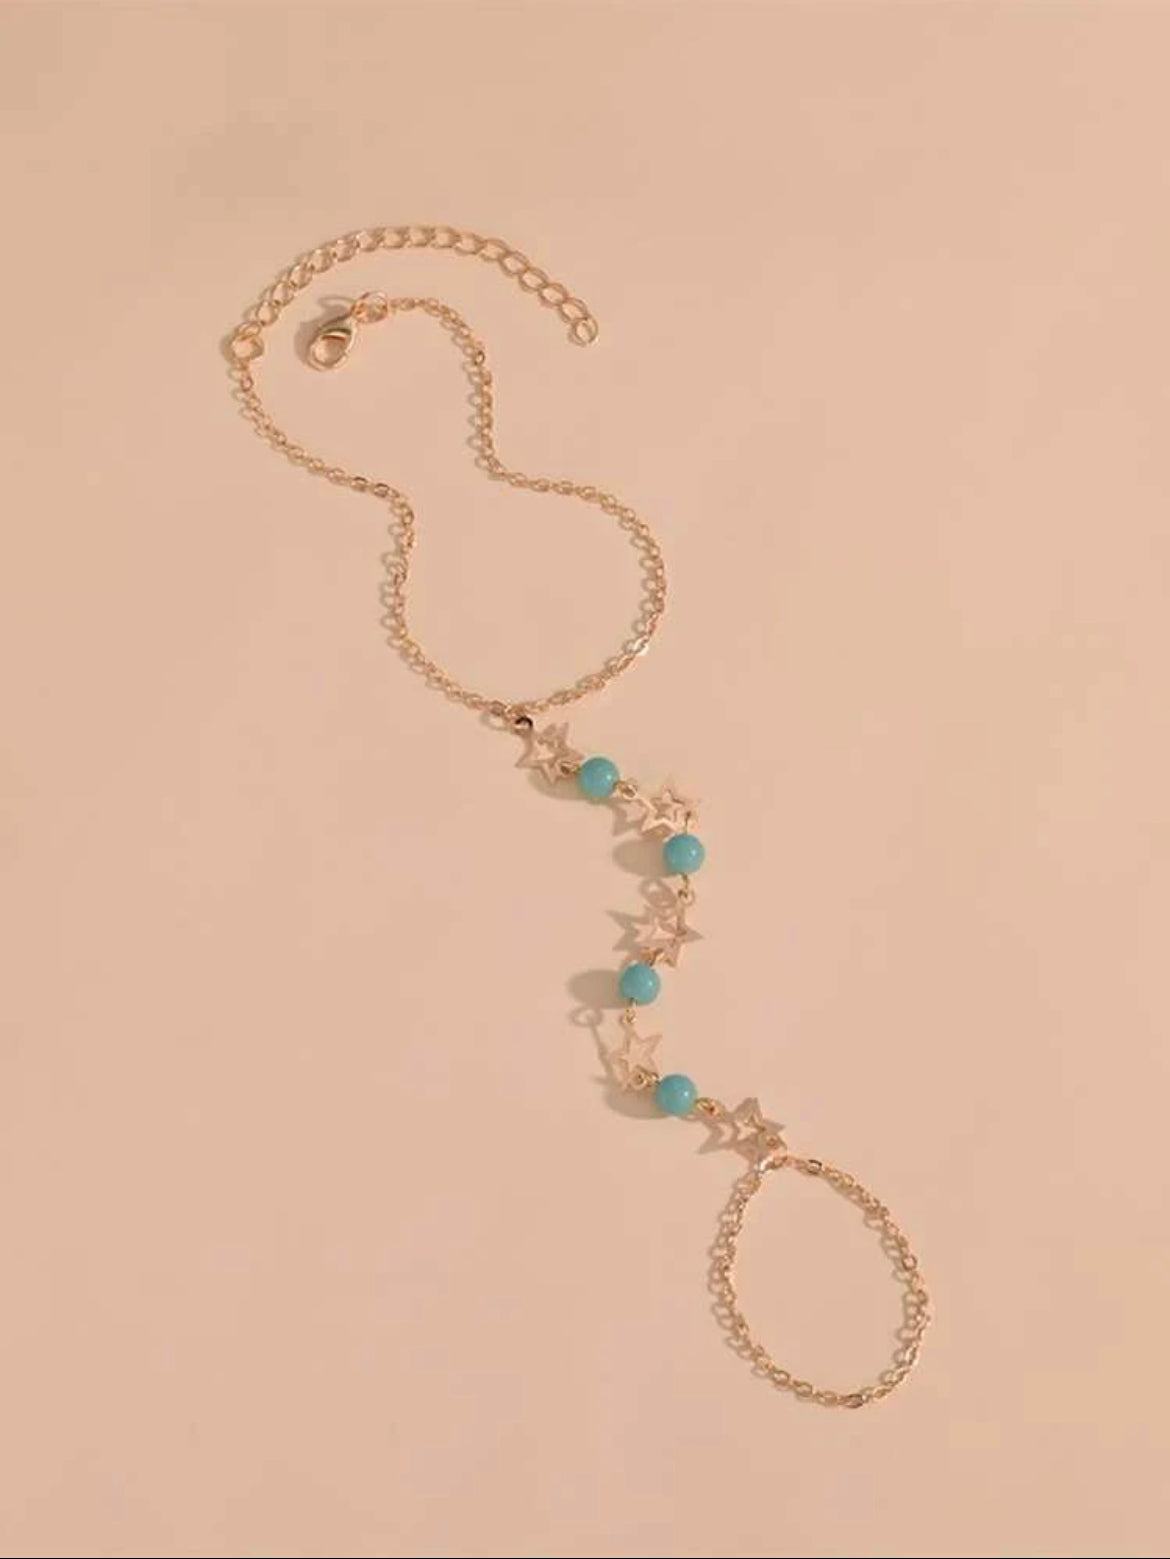 Star anklet with luminous blue beads.